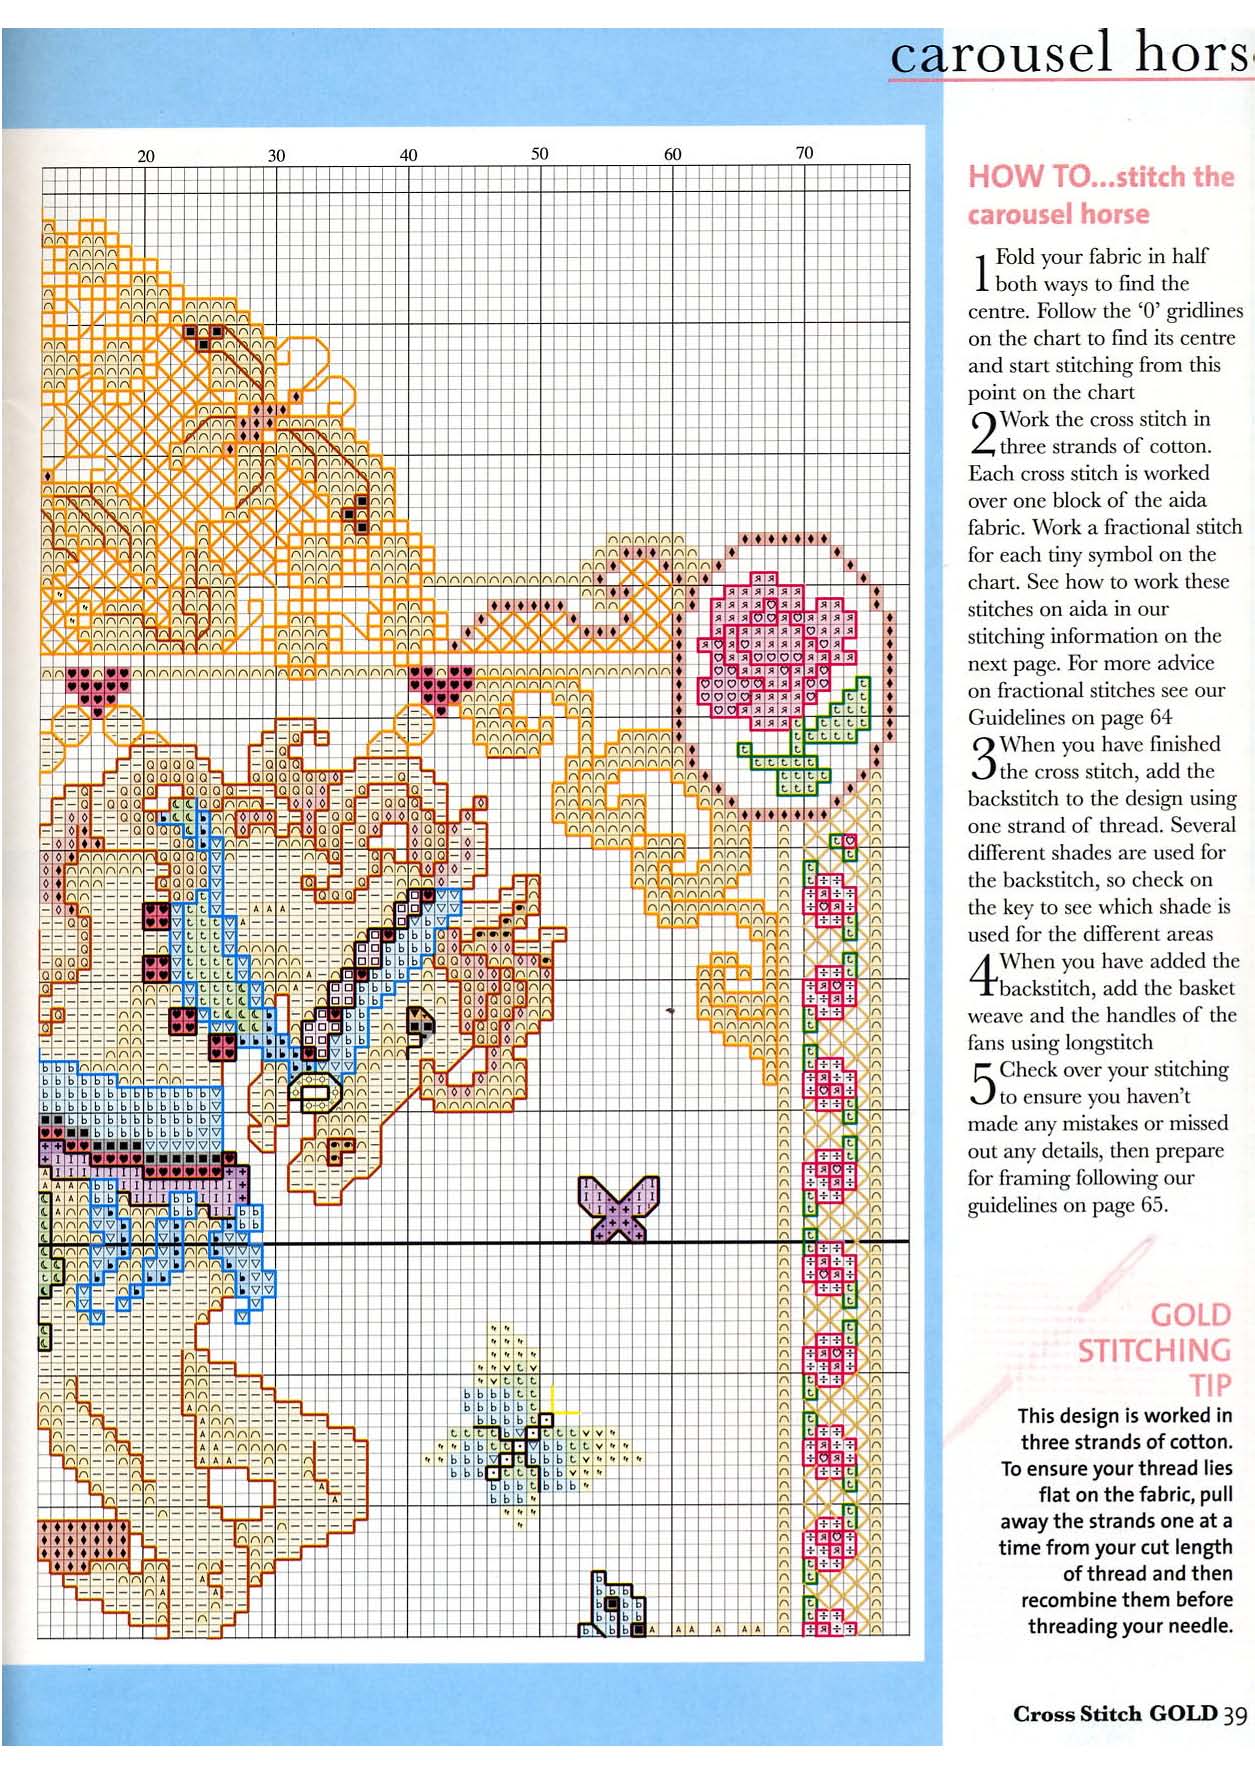 Carousel with horses cross stitch pattern (4)